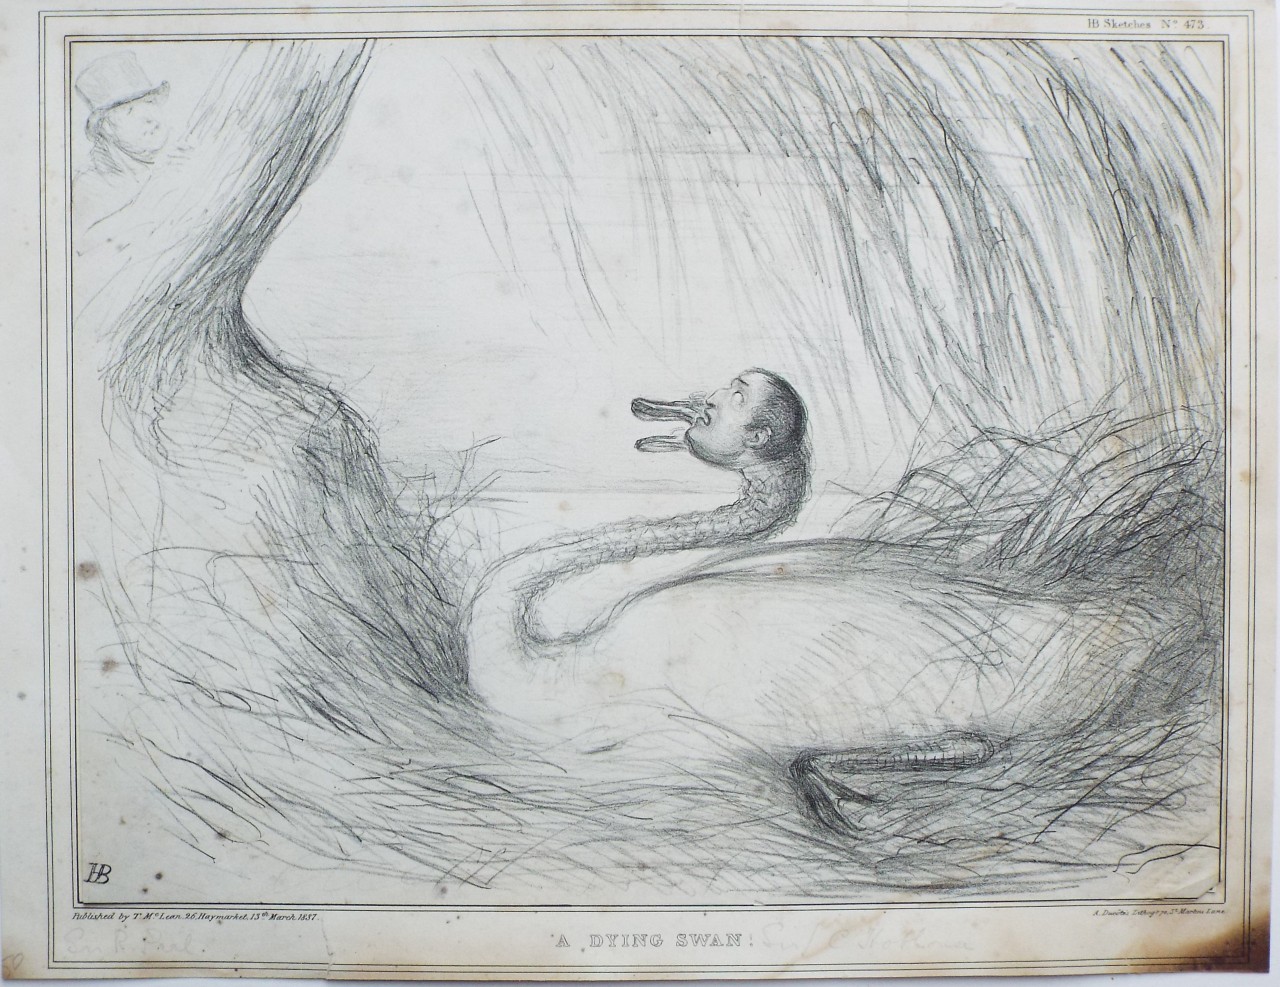 Lithograph - 473: A Dying Swan !